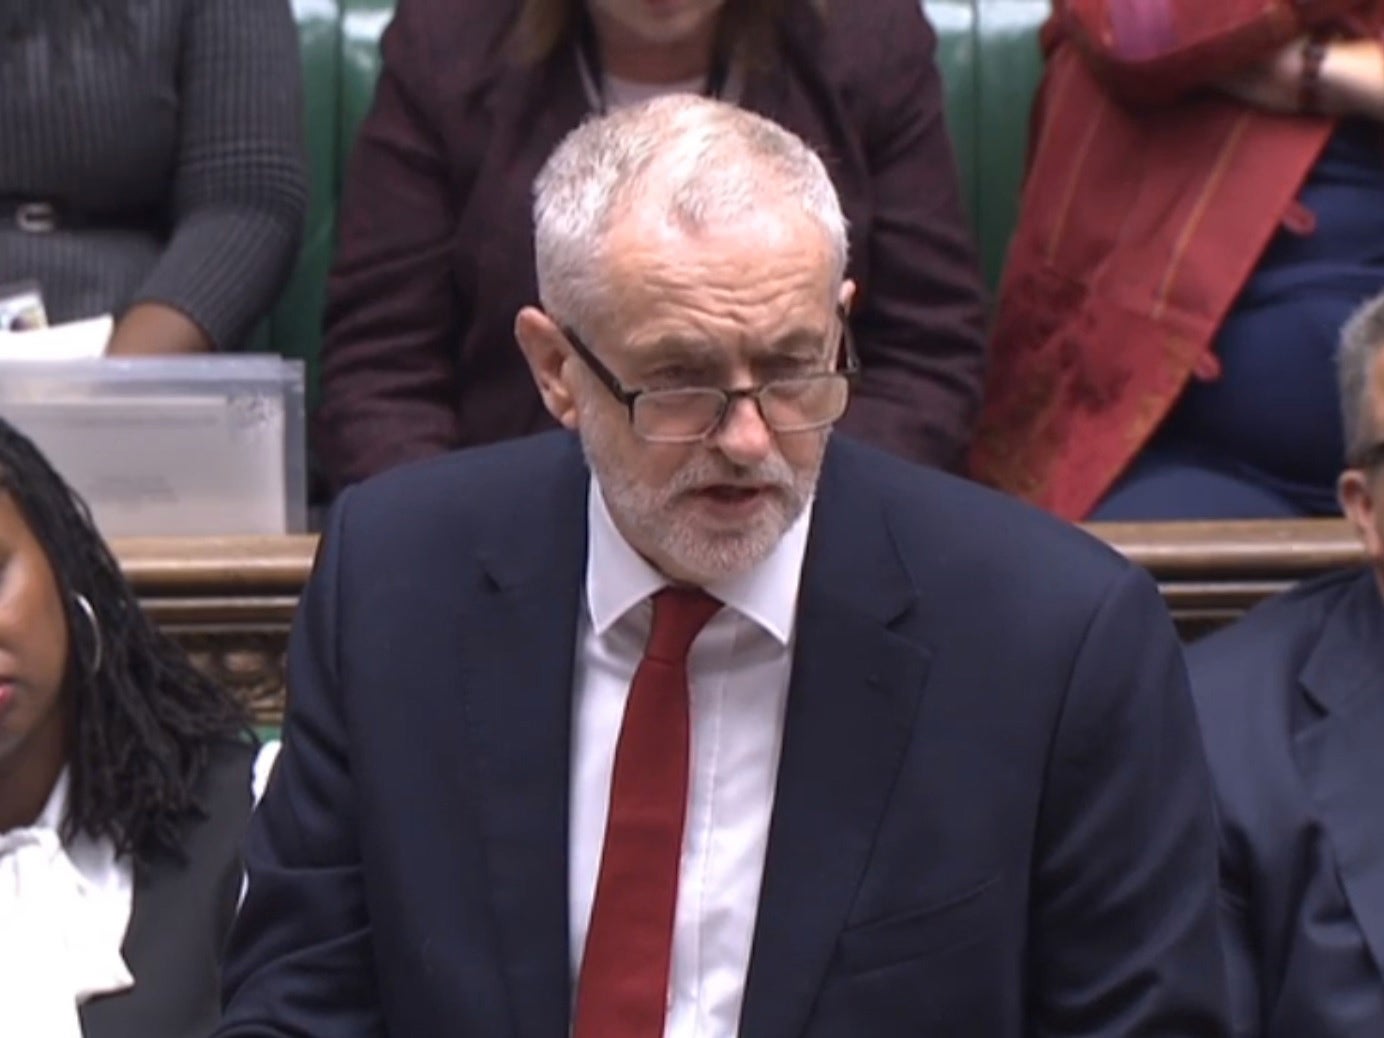 Corbyn made the suggestion in a letter to the PM